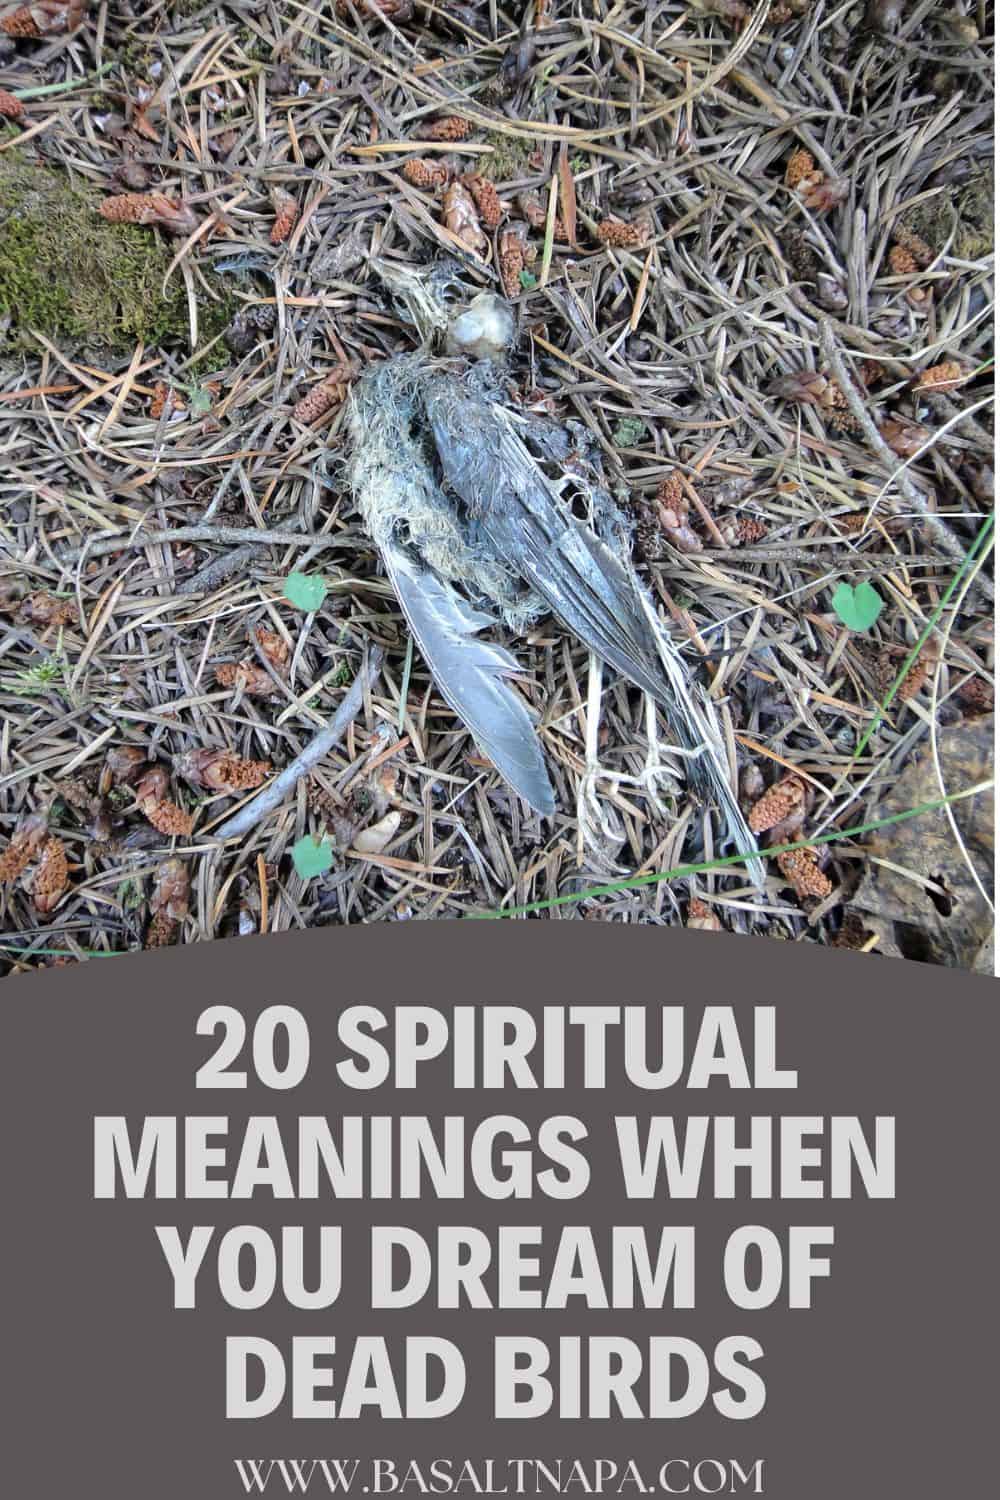 20 Spiritual Meanings When You Dream of Dead Birds